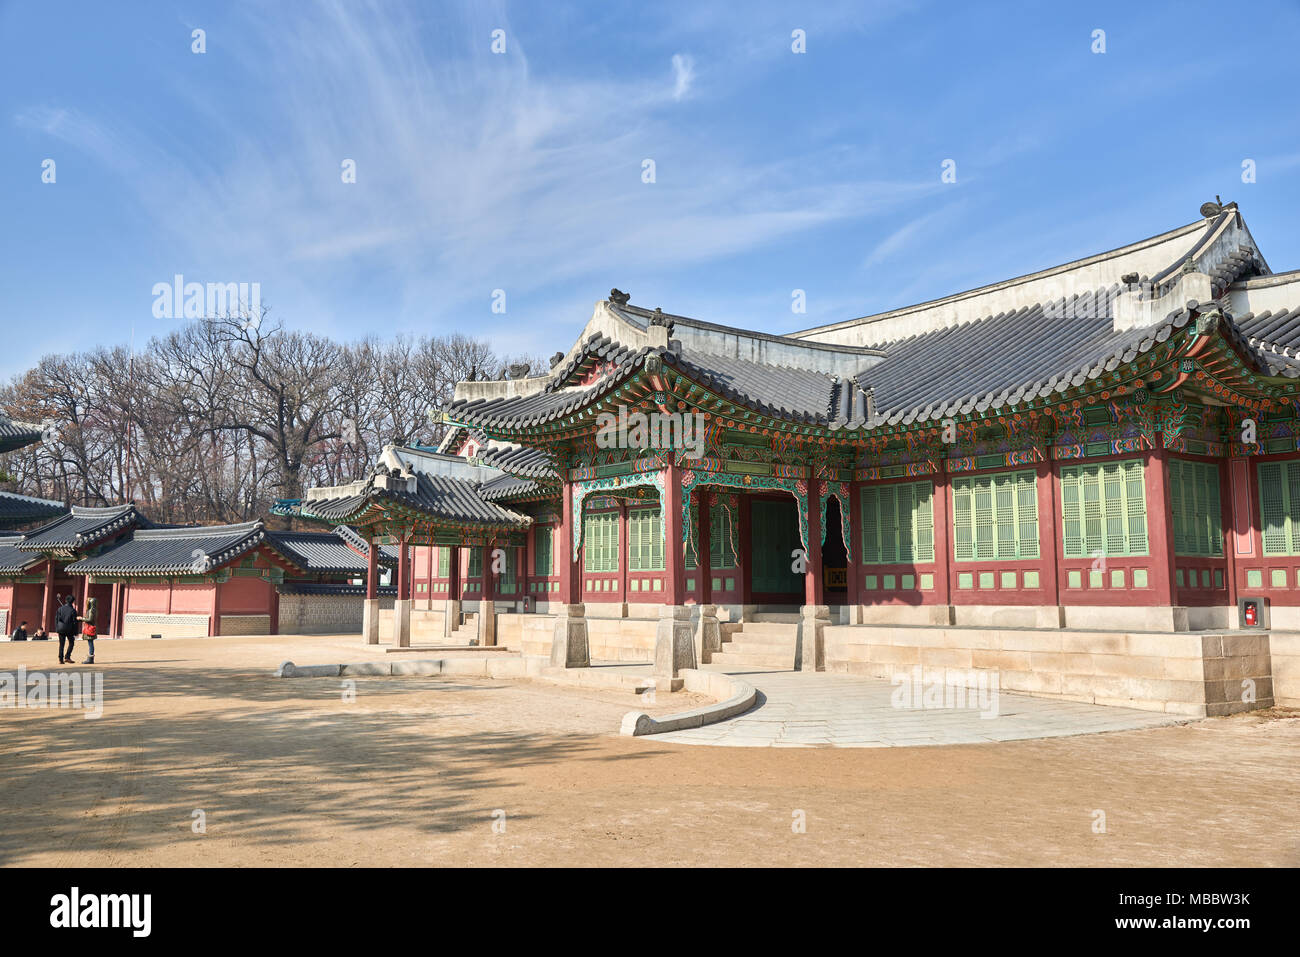 Seoul, Korea - December 9, 2015: Entrance of Huijeongdang in Changdeokgung. Changdeokgung is a palace built as a secondary palace of the Joseon dynast Stock Photo